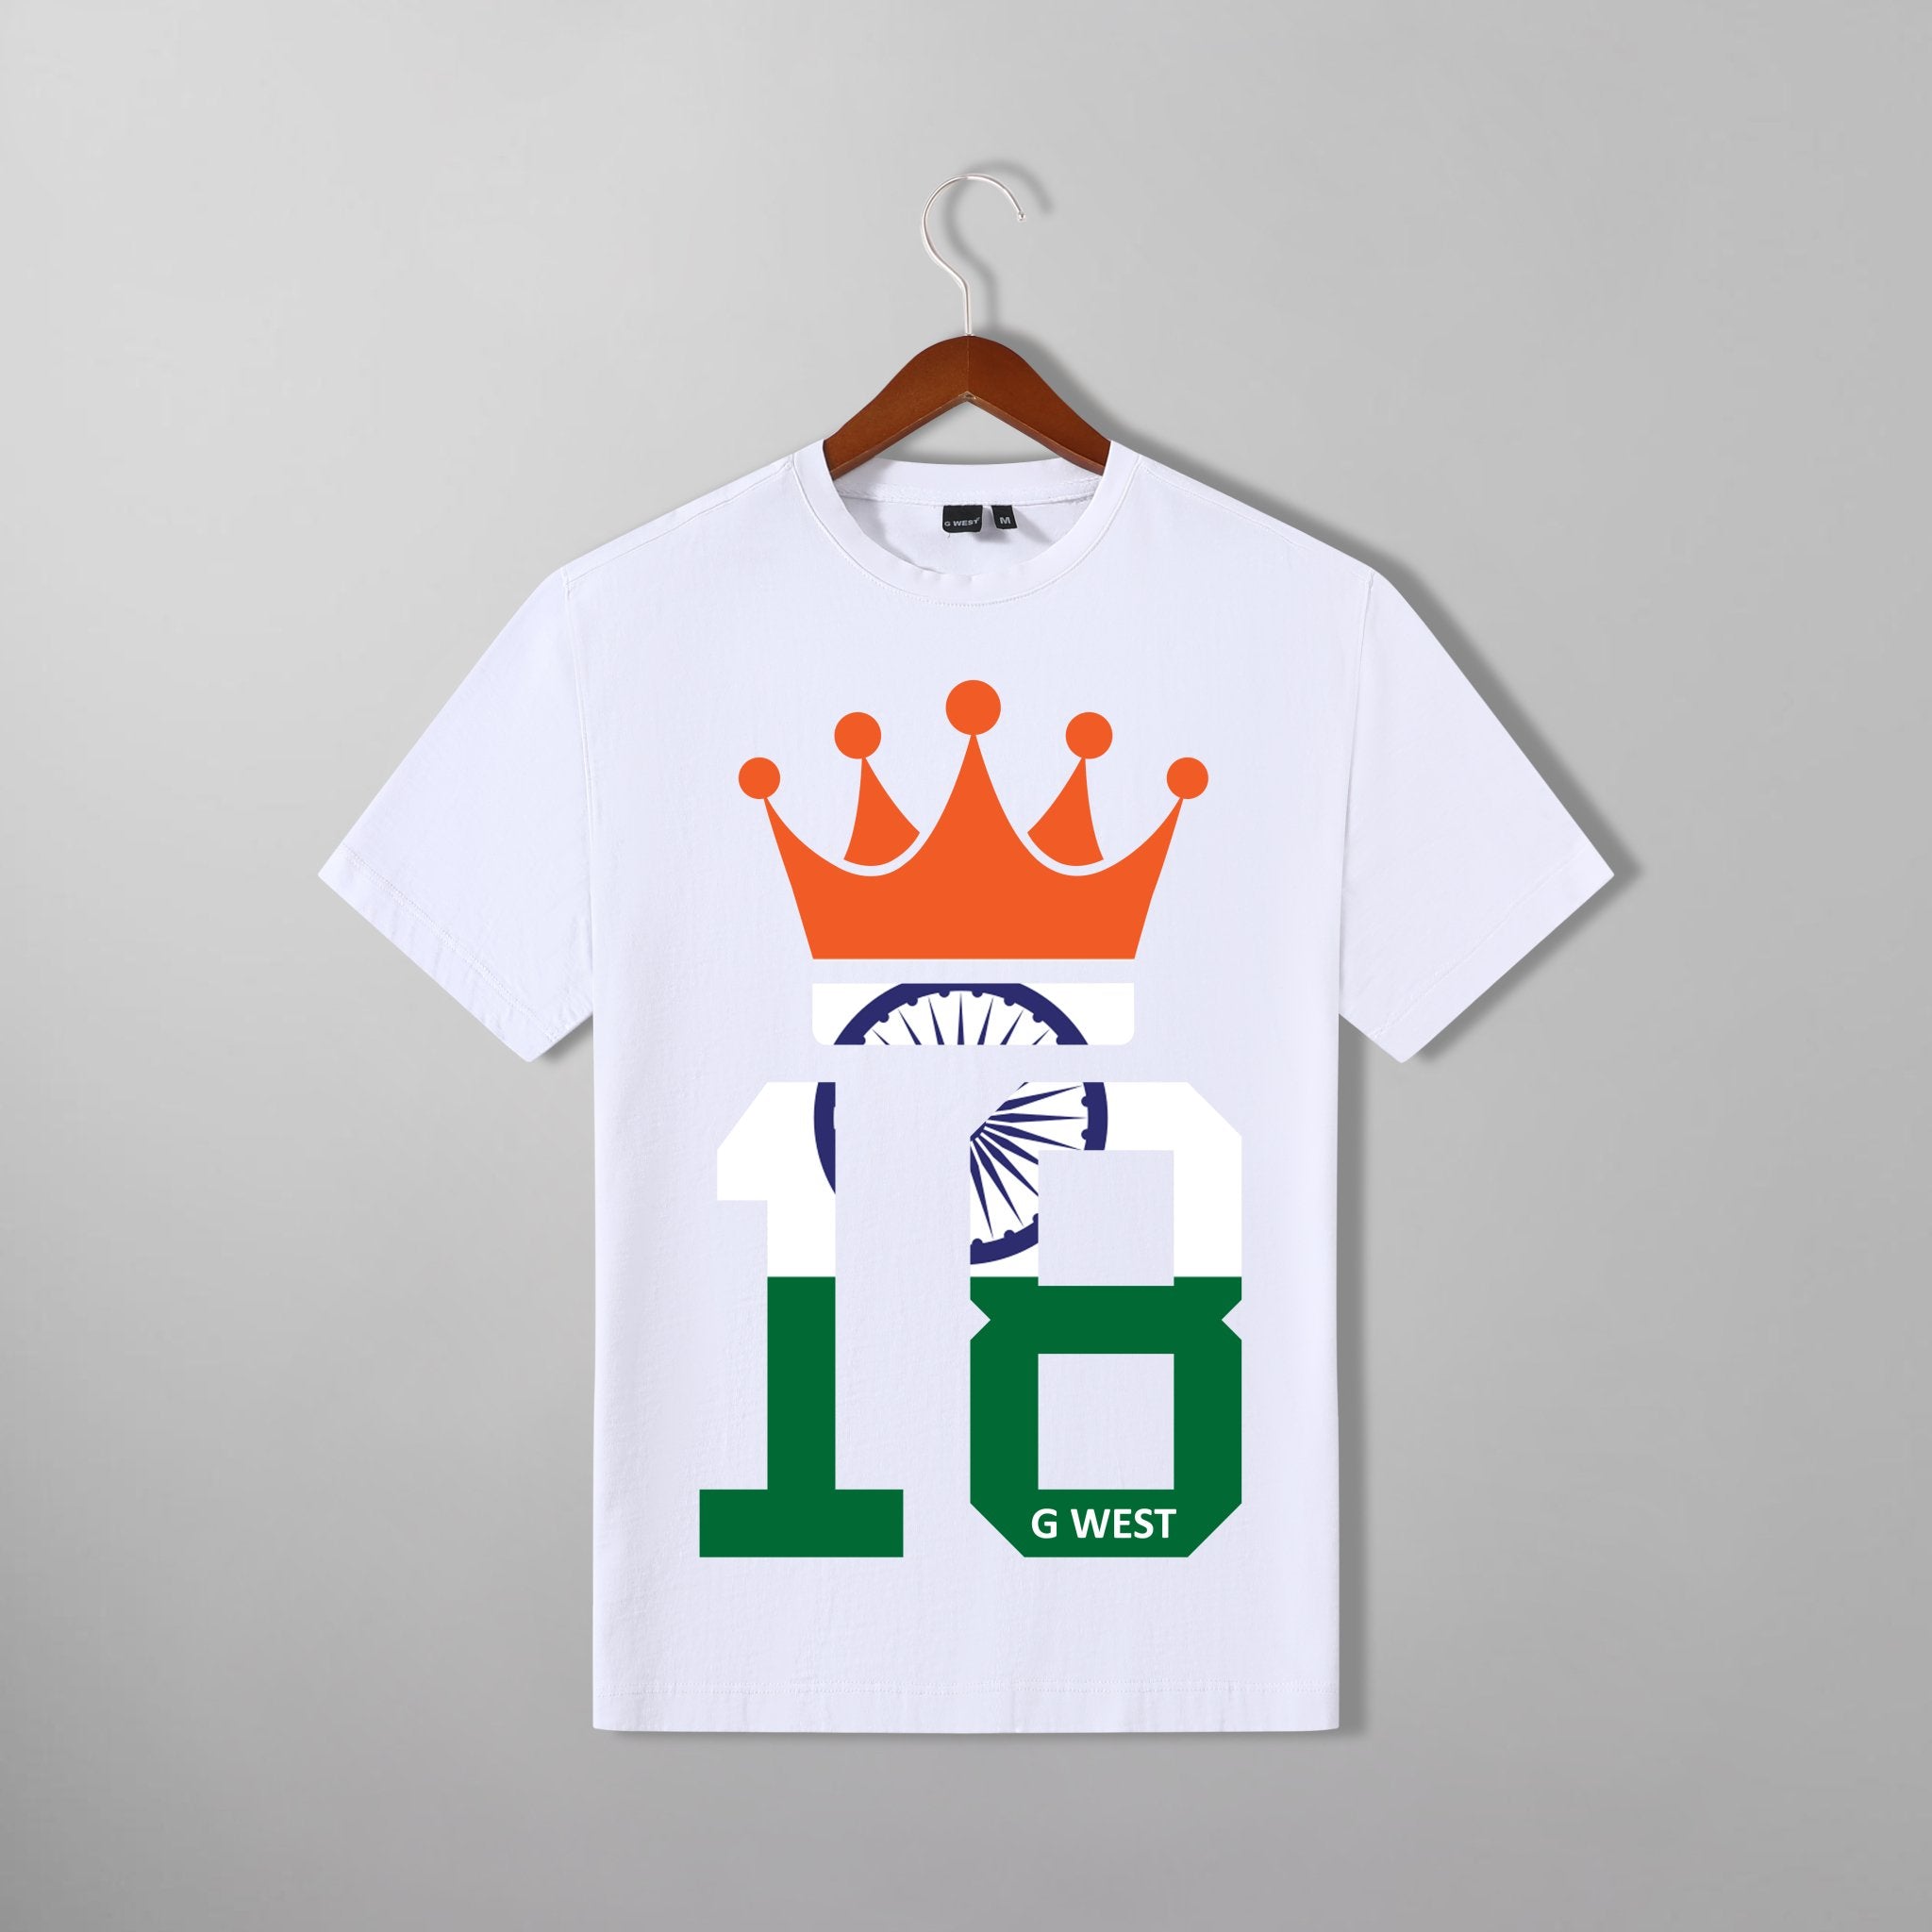 G West Cricket India King-18 T-Shirt : GWDTFL2412 - 3 COLORS - G West